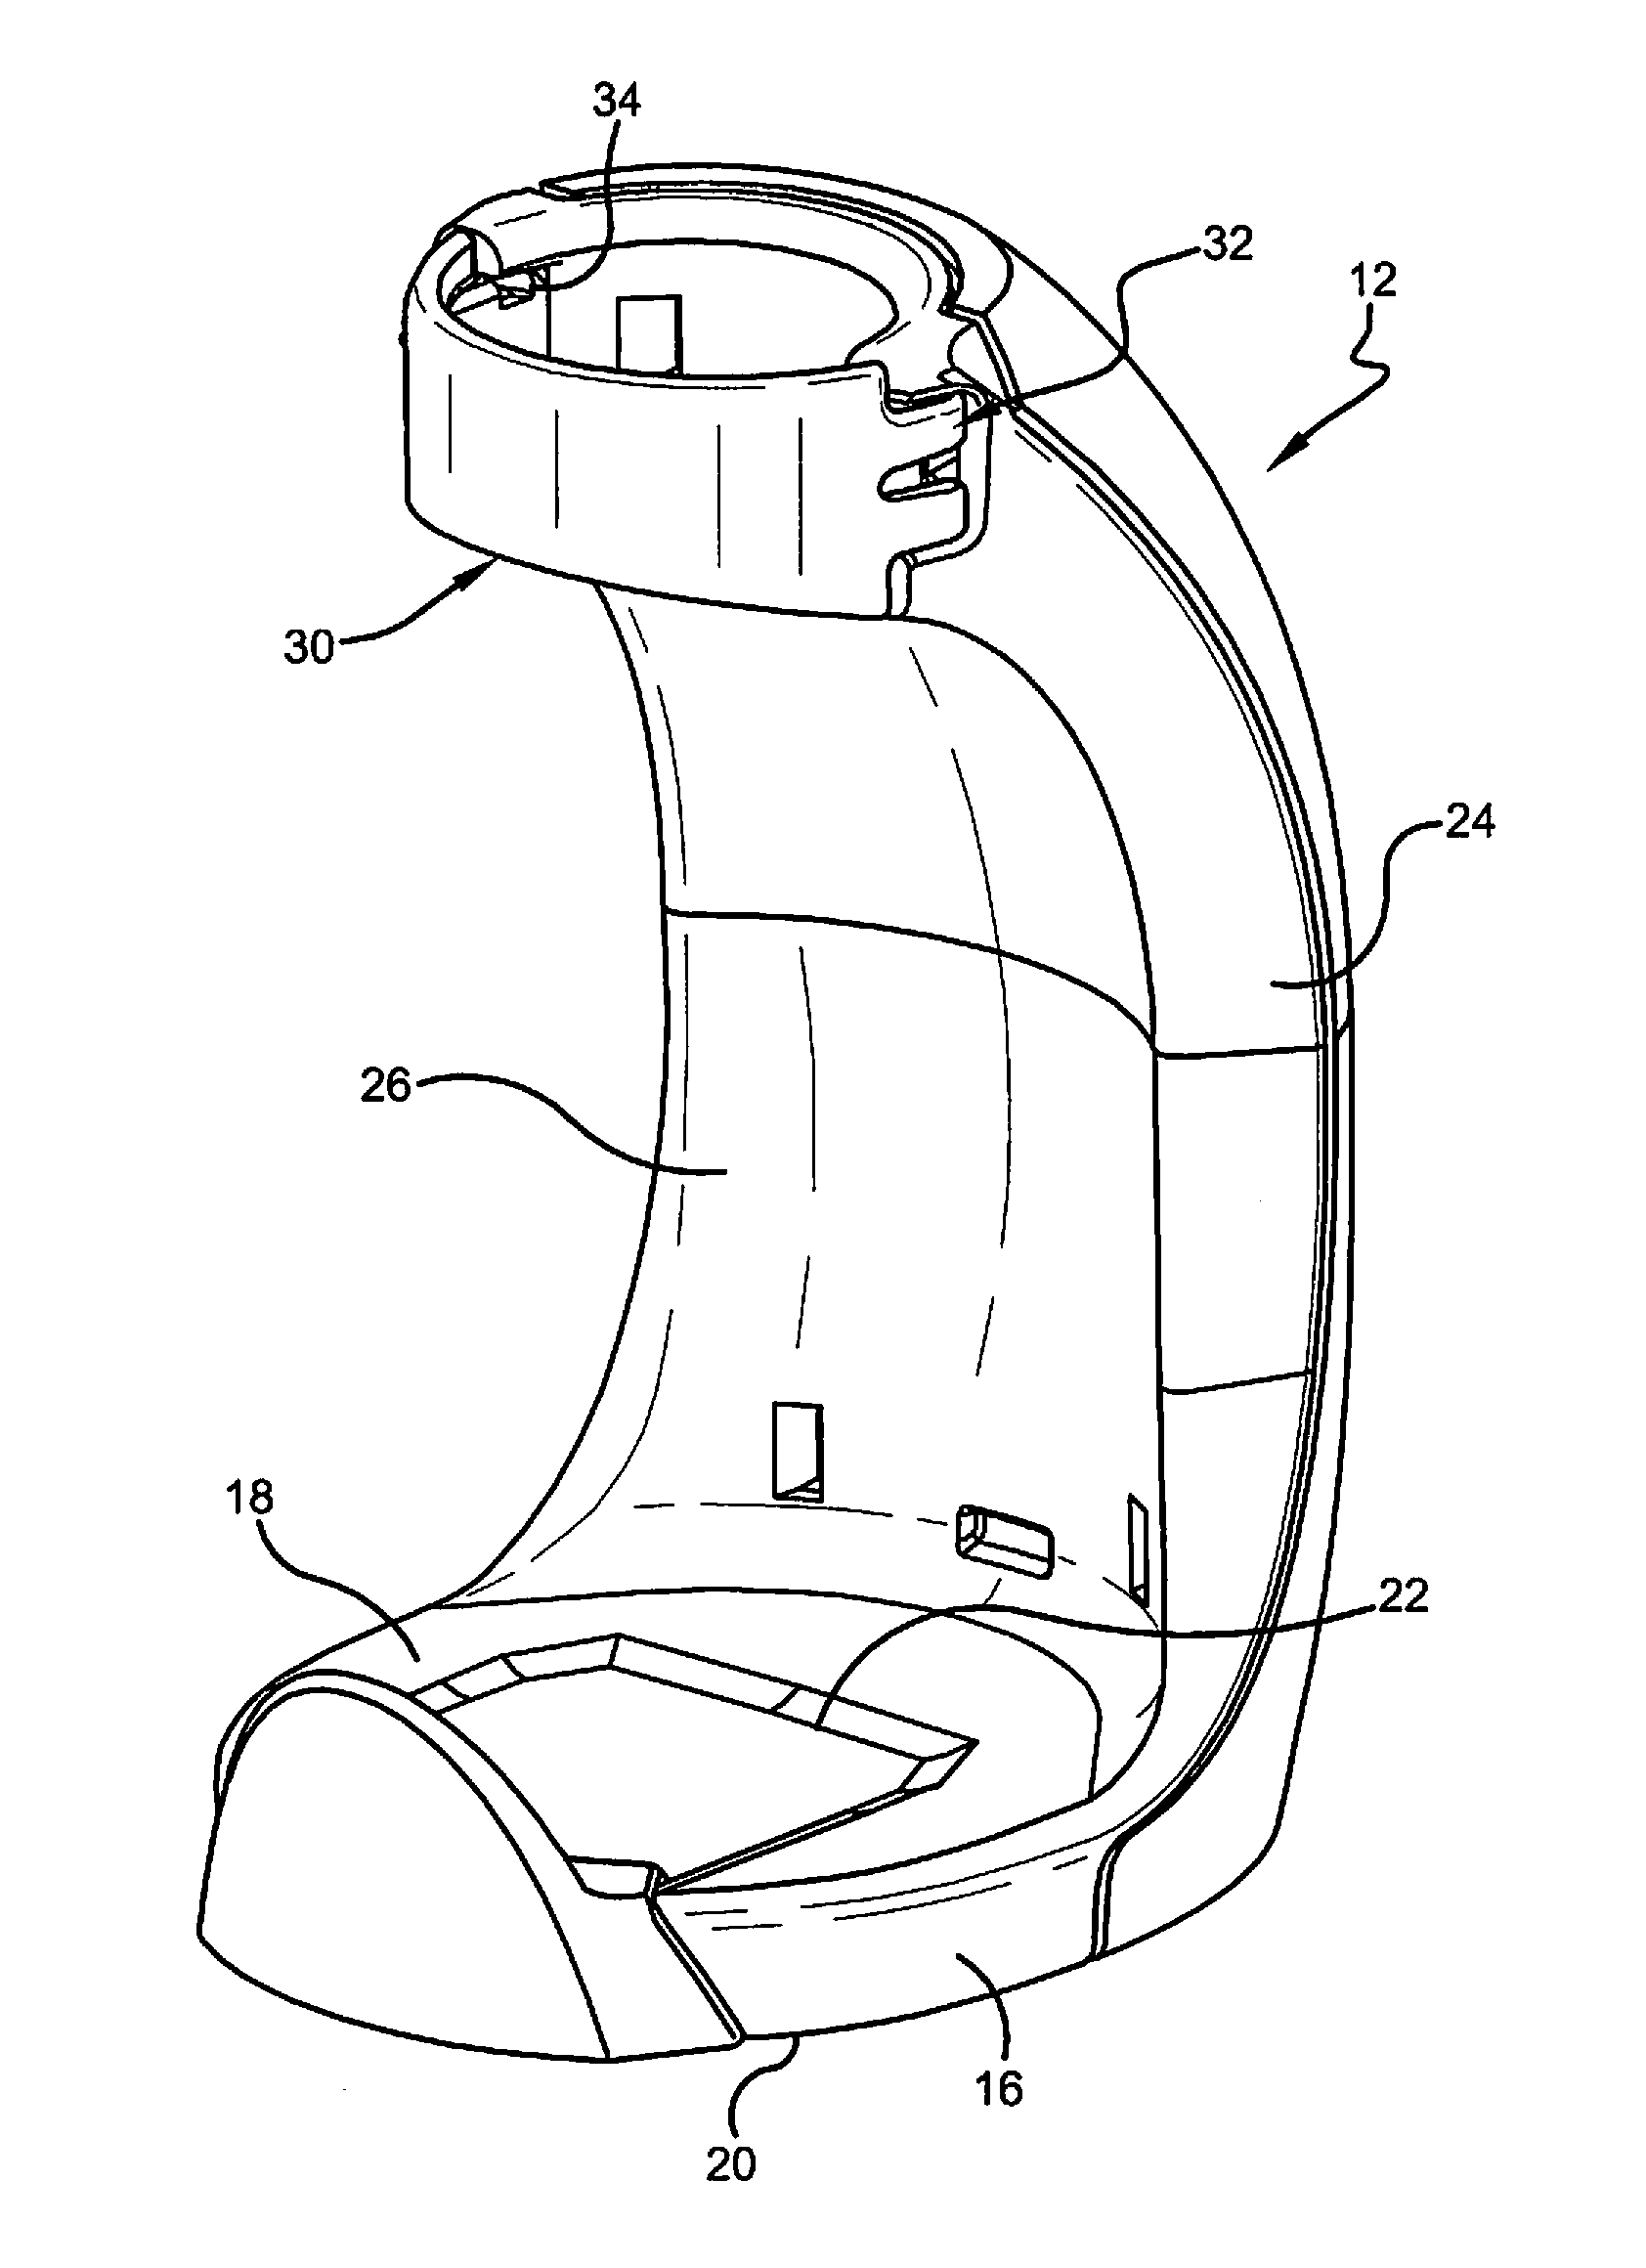 Bottle mounting system including separable bottle and clamp